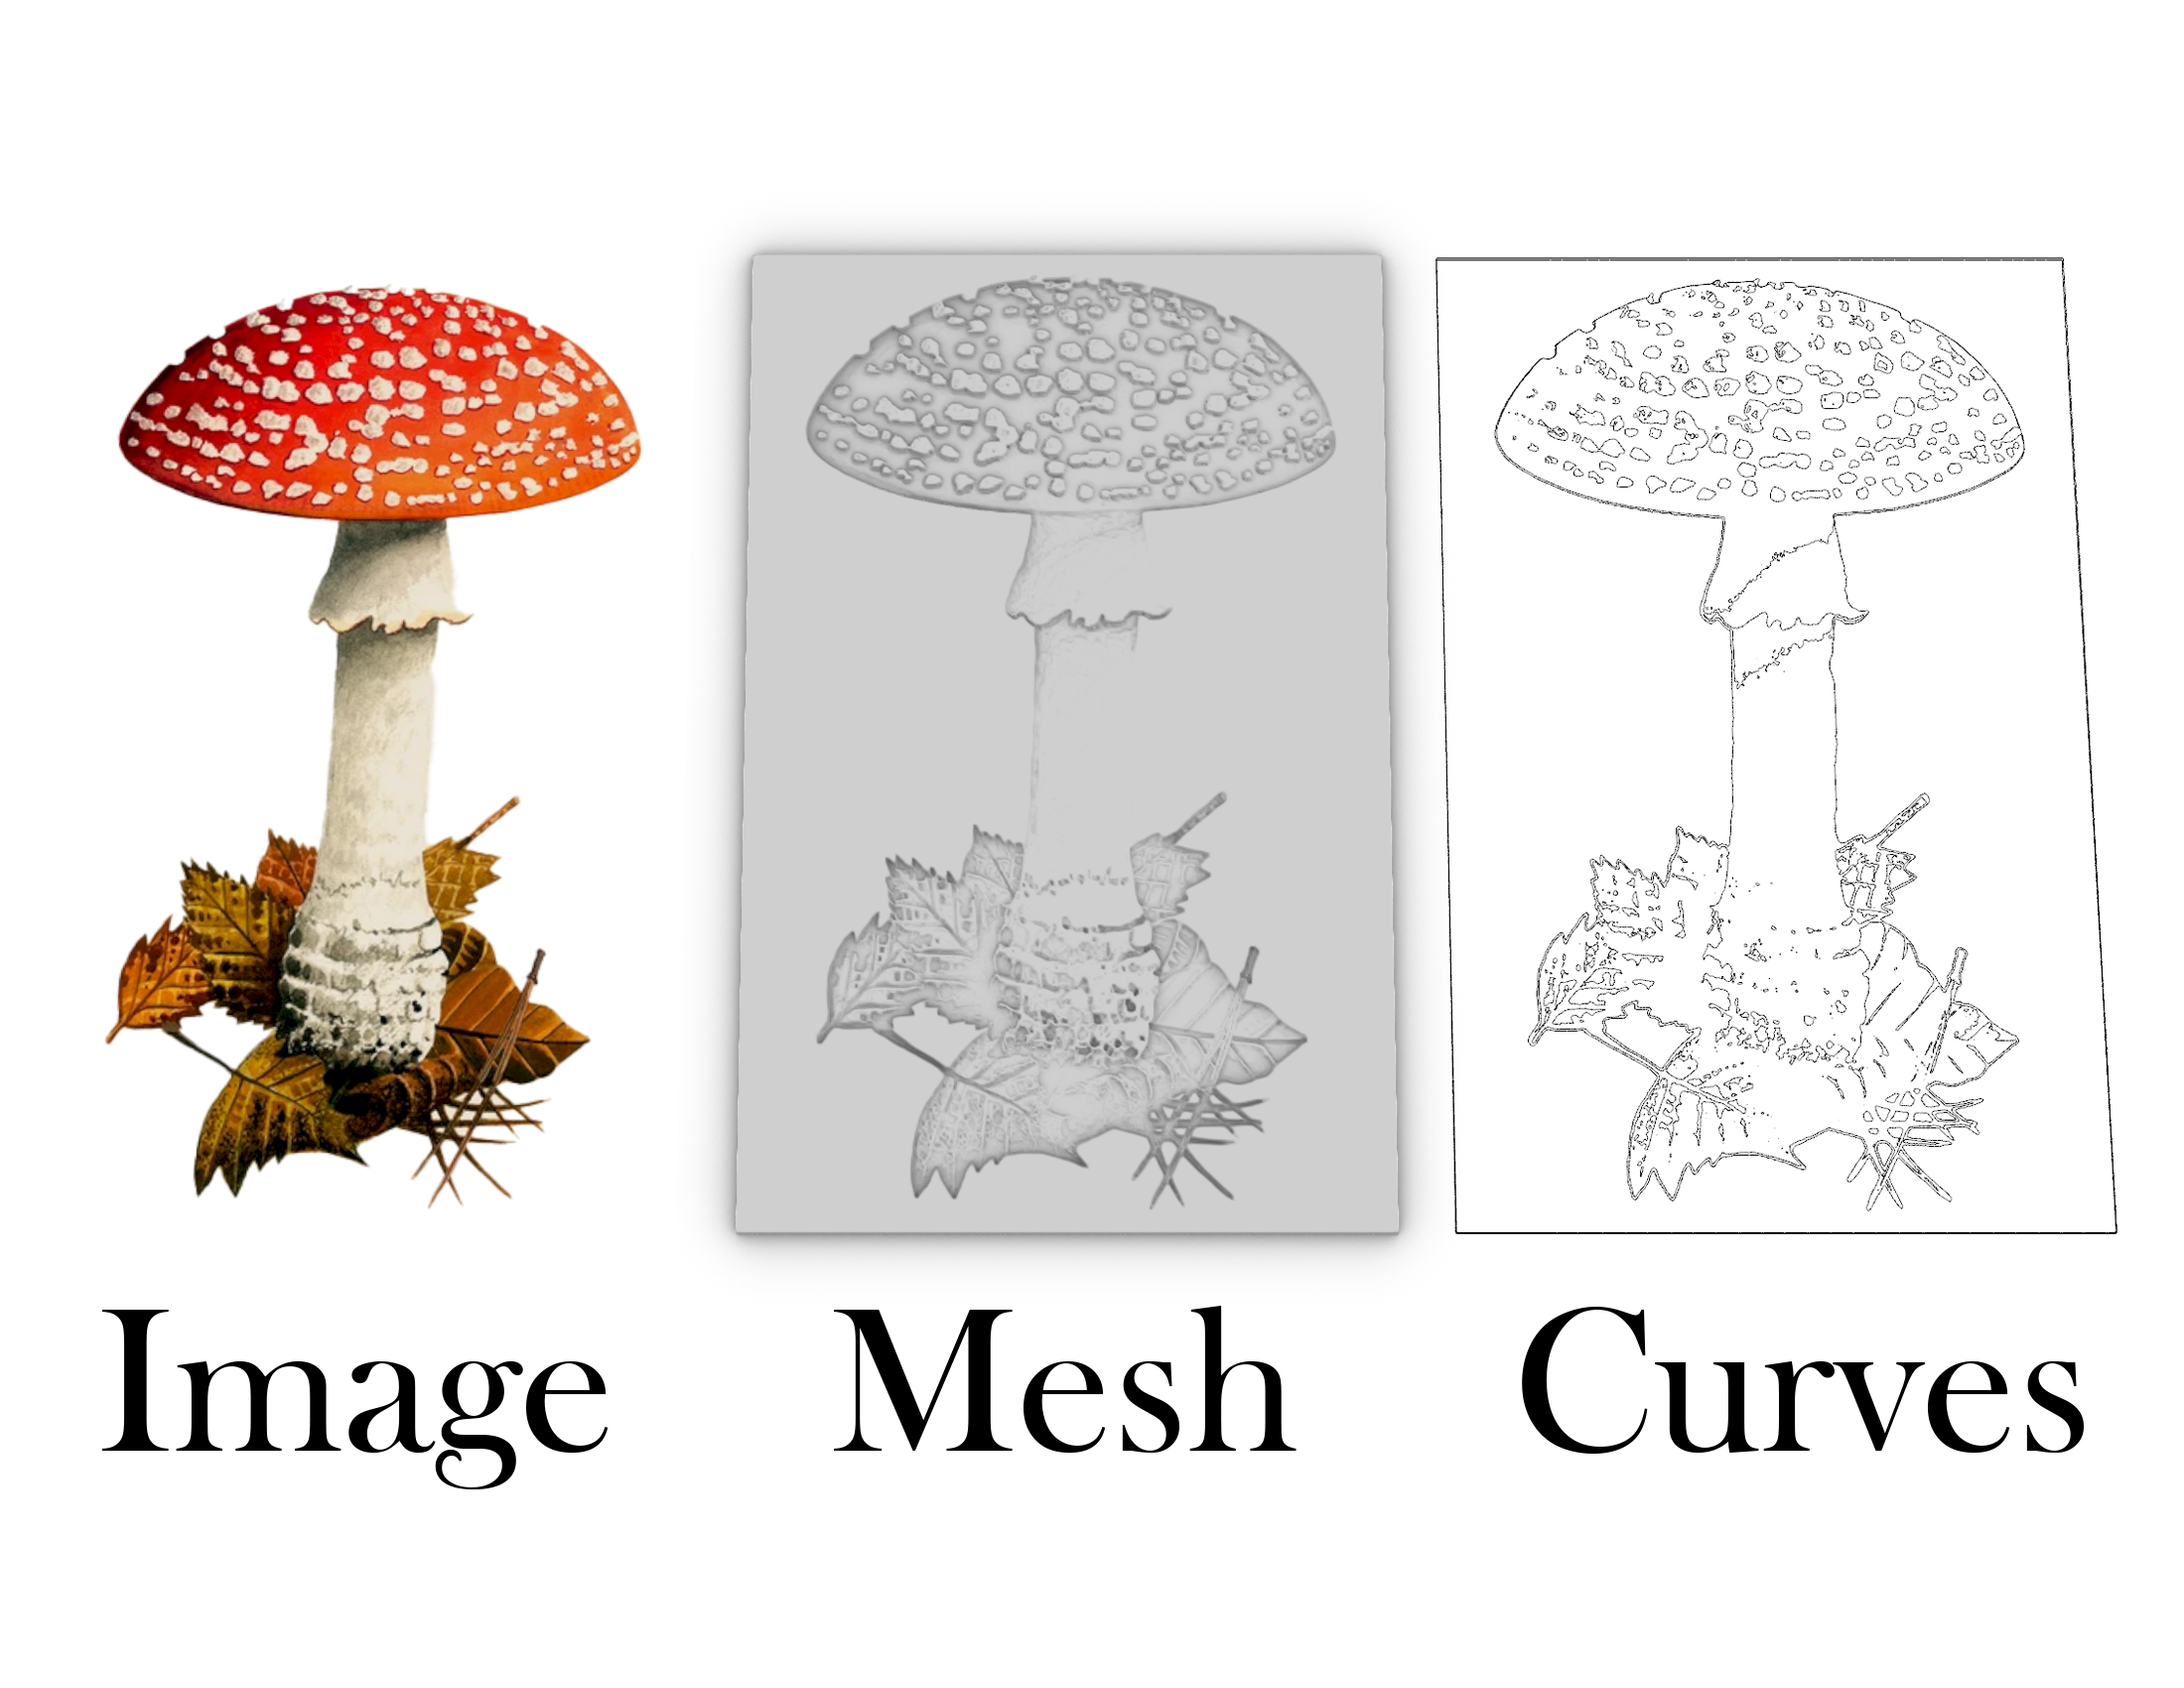 an image of a mushroom being digitally translated into a vector drawing